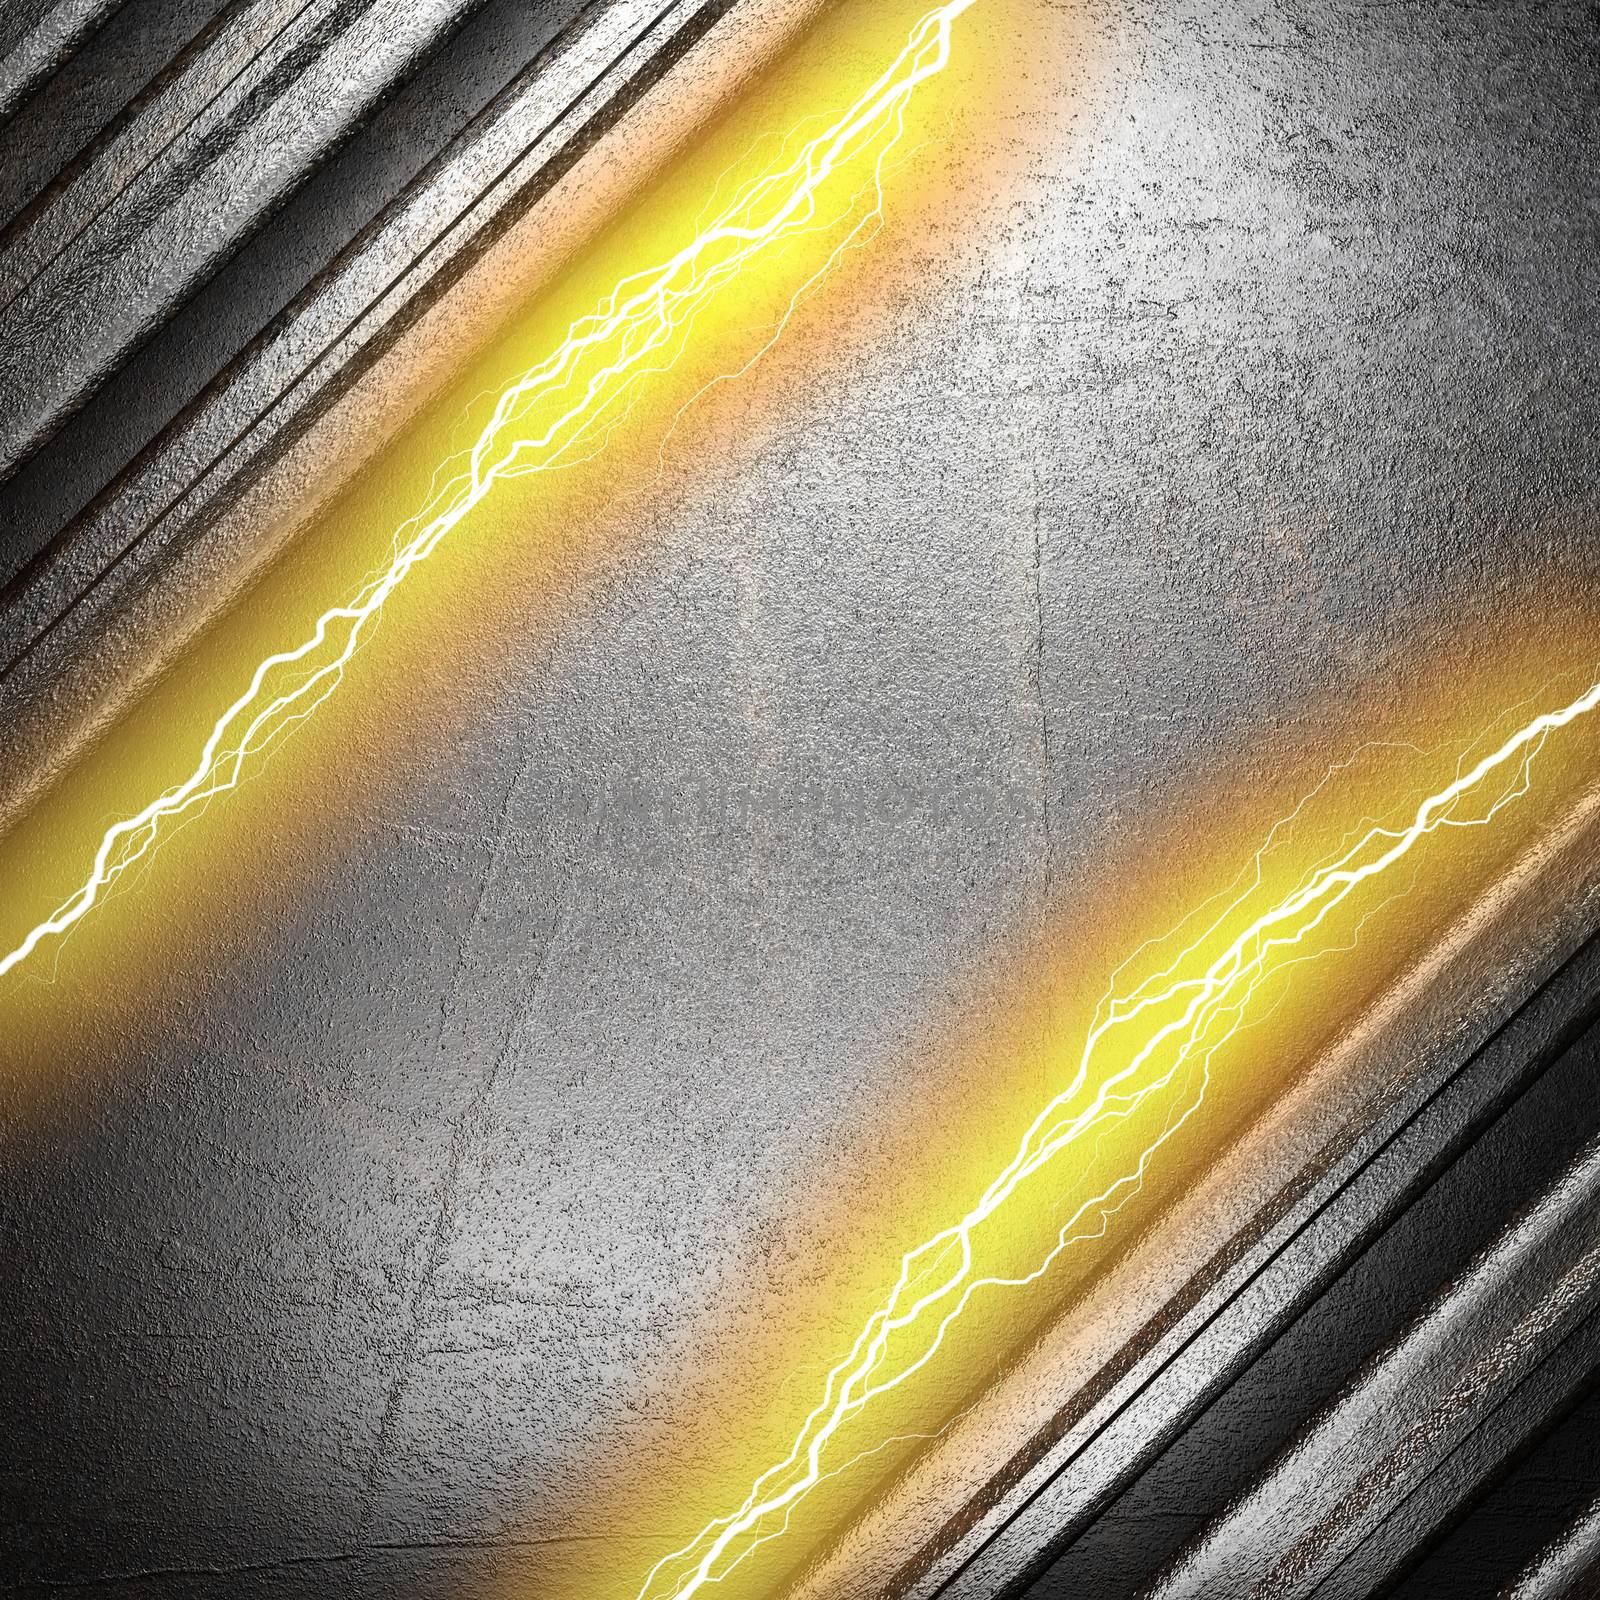 metal background with electric lightning by videodoctor